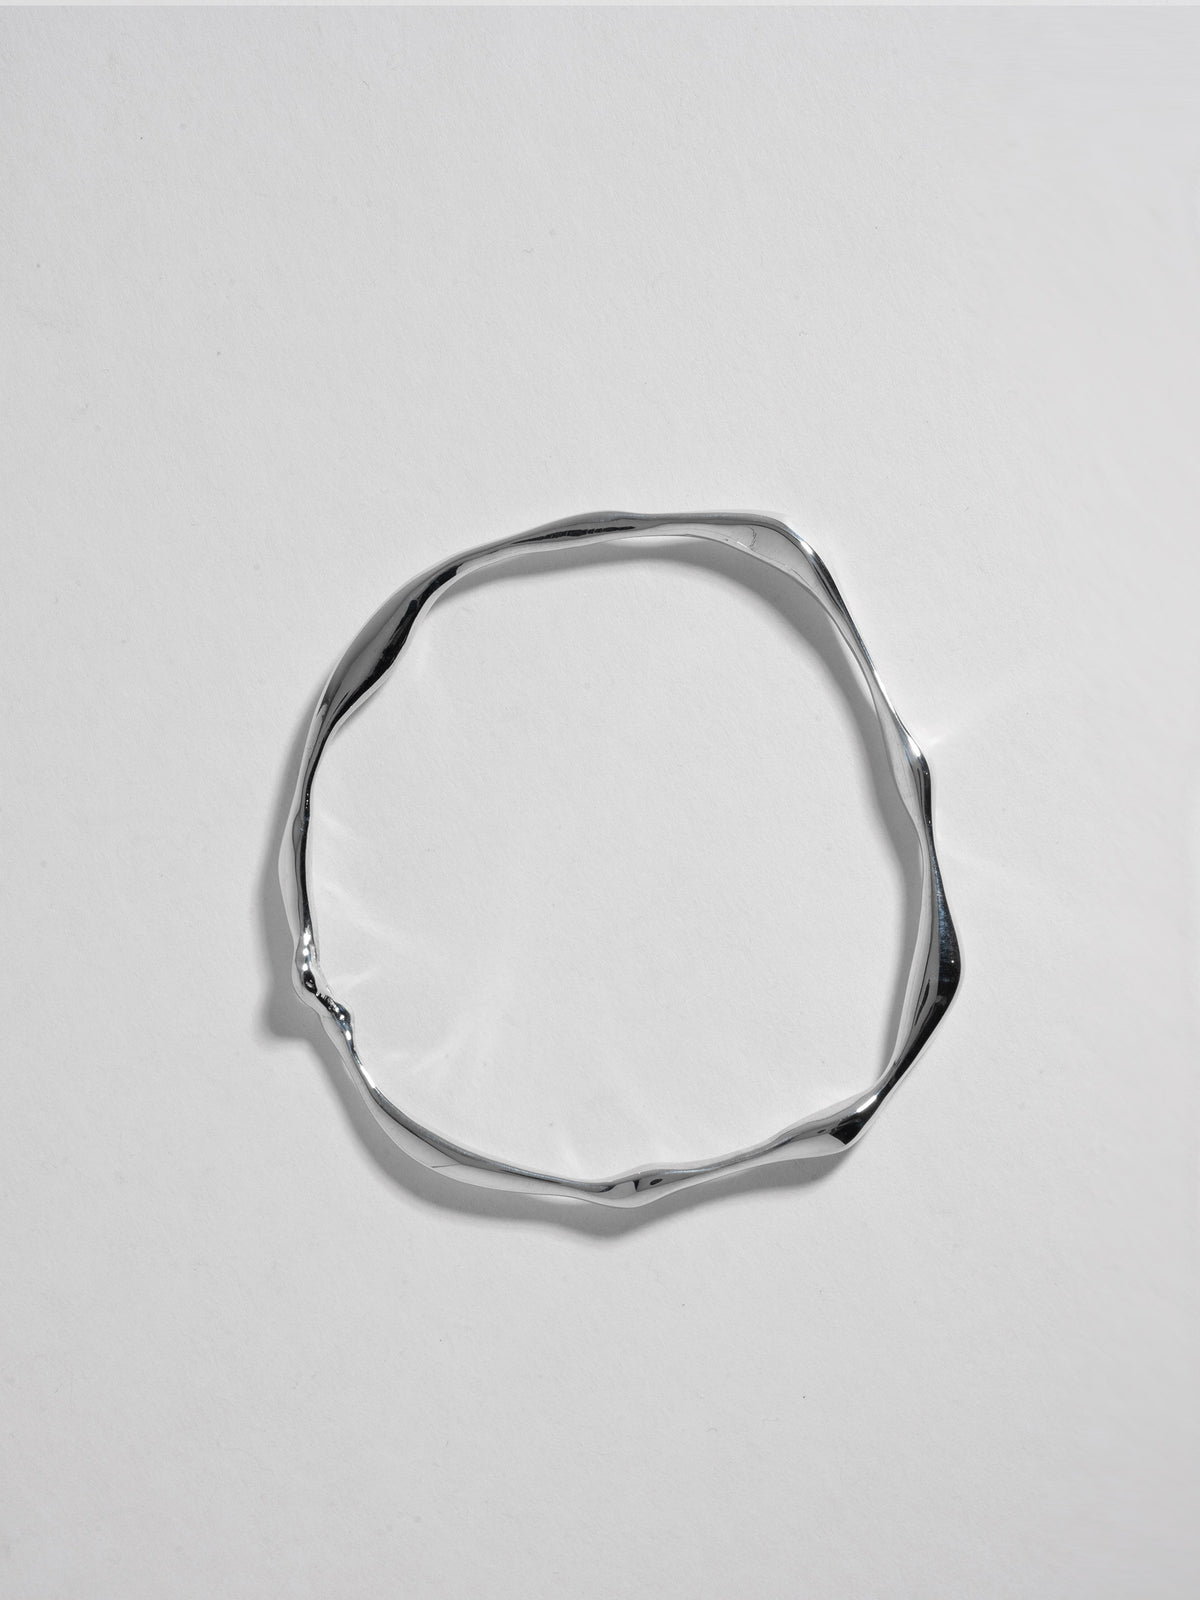 Front view product image of FARIS ONDA Bangle in sterling silver